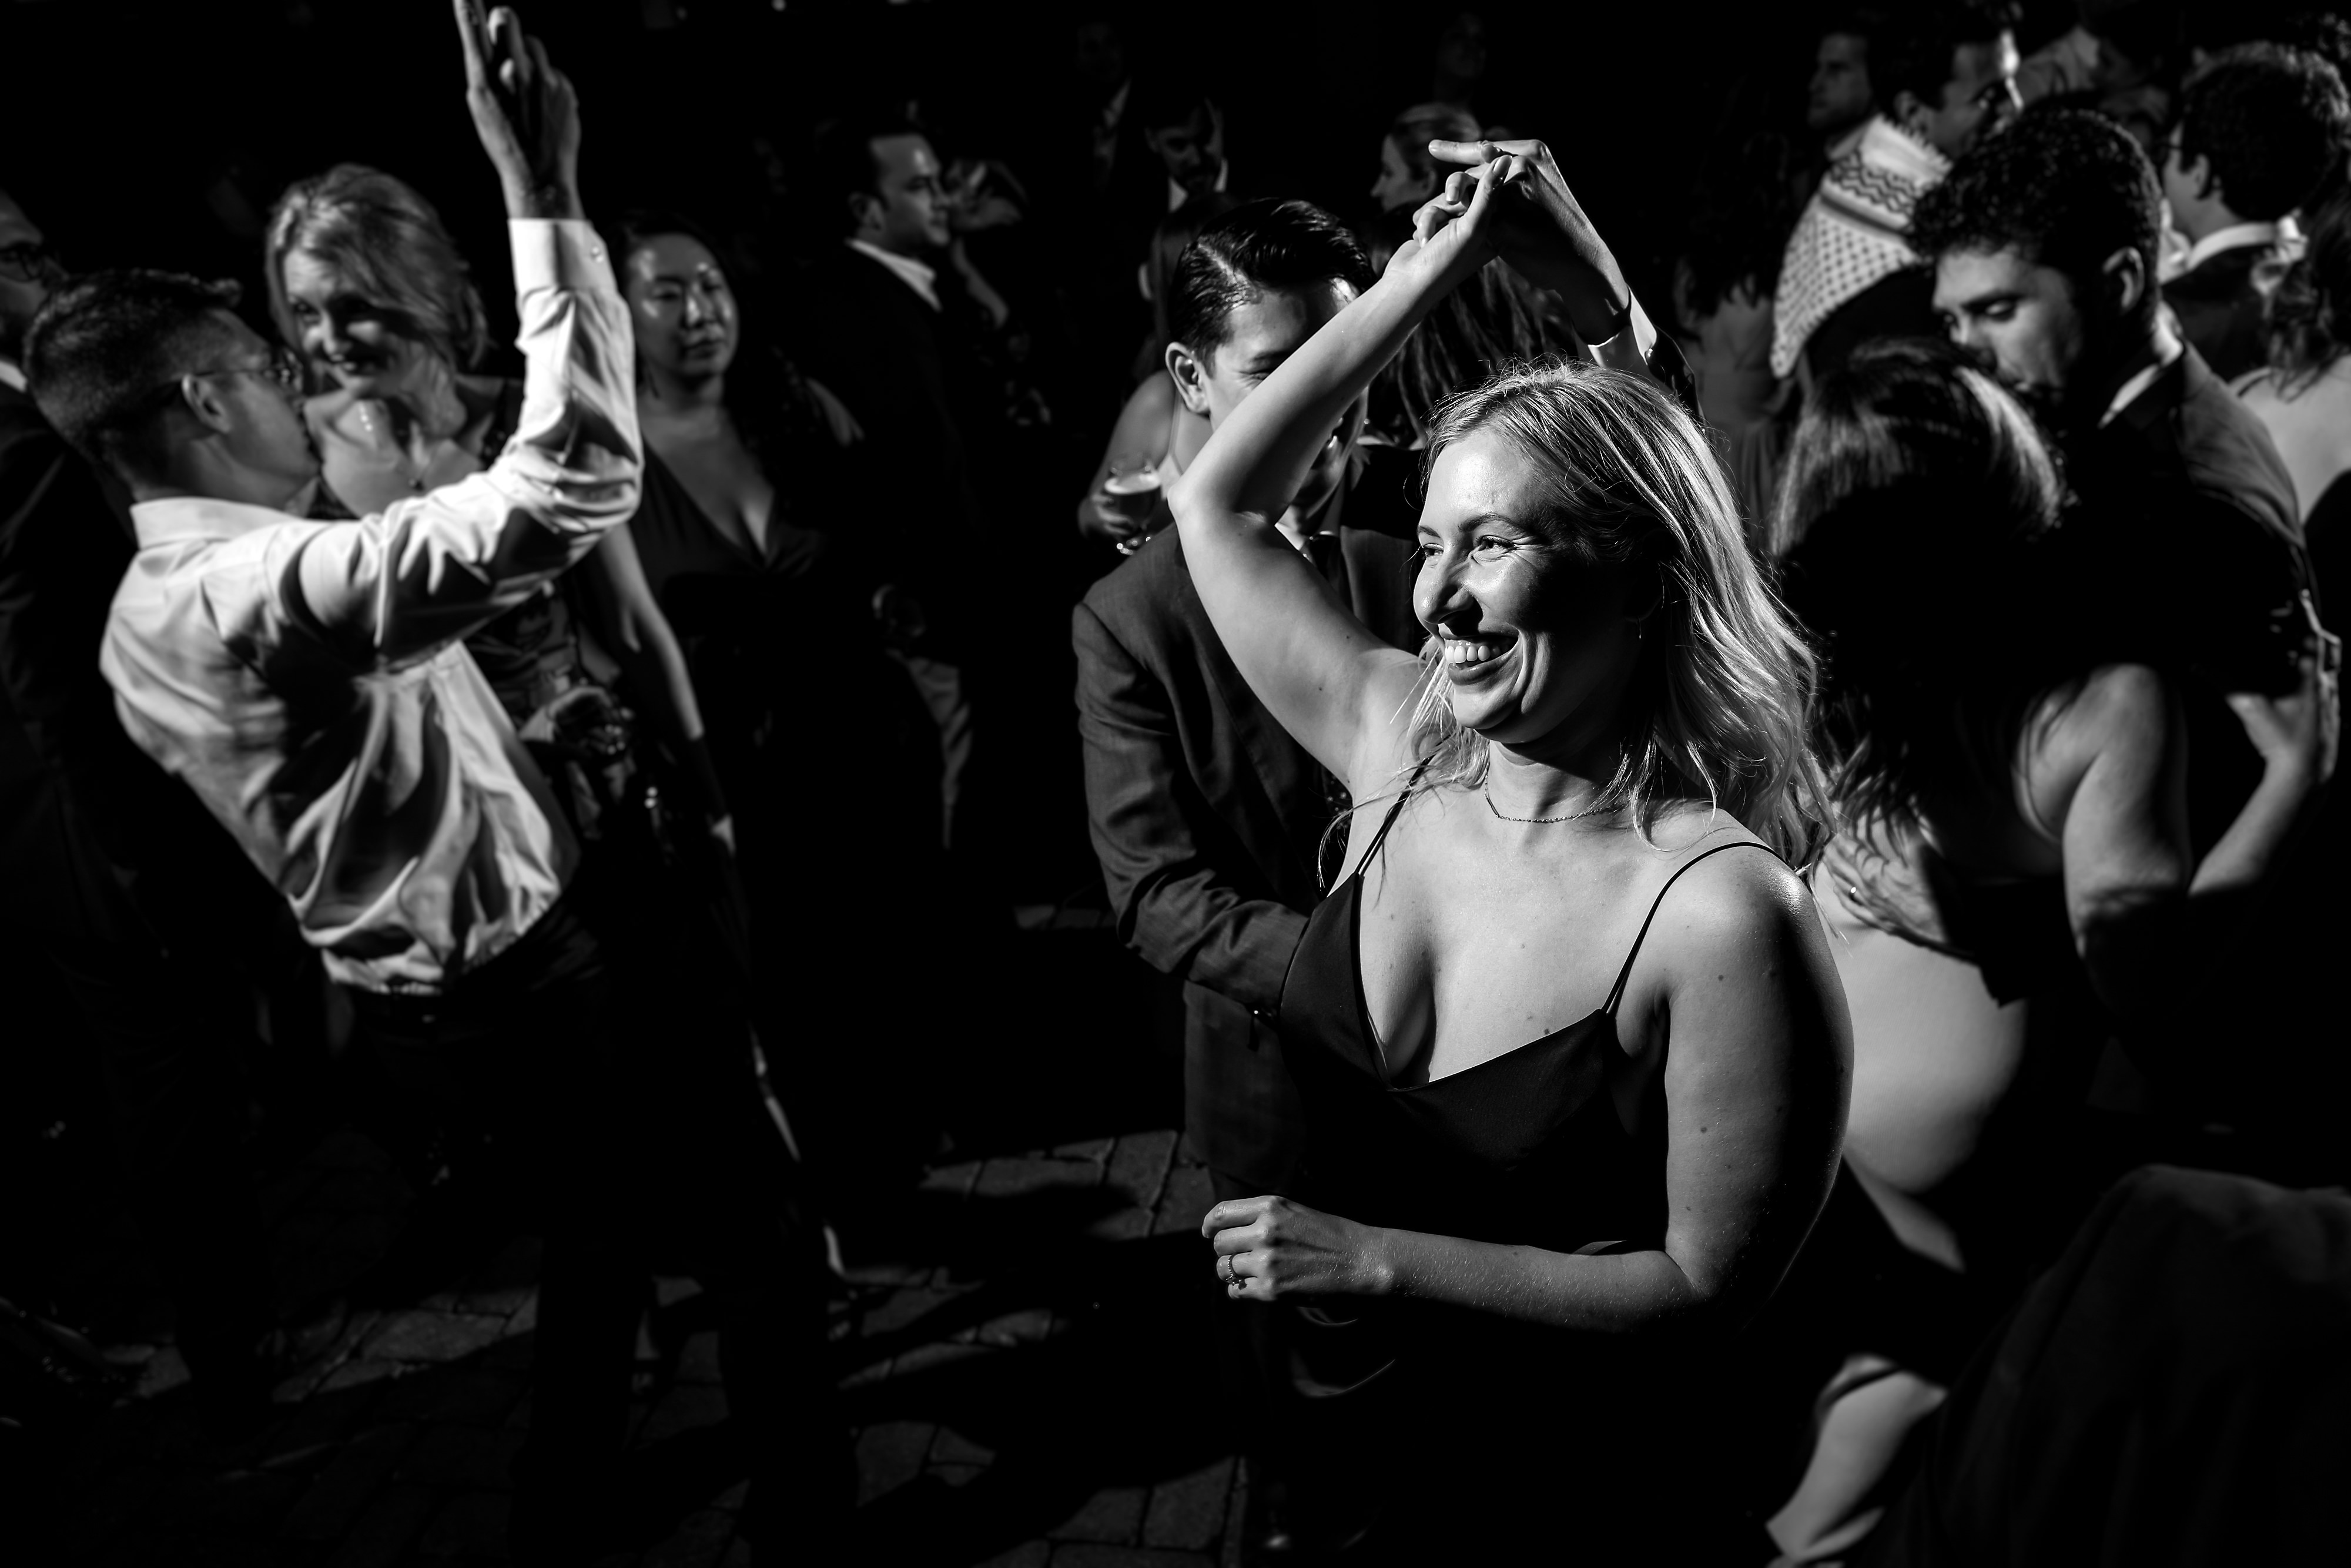 guests dance during outdoor wedding reception at The Dawson restaurant in downtown Chicago